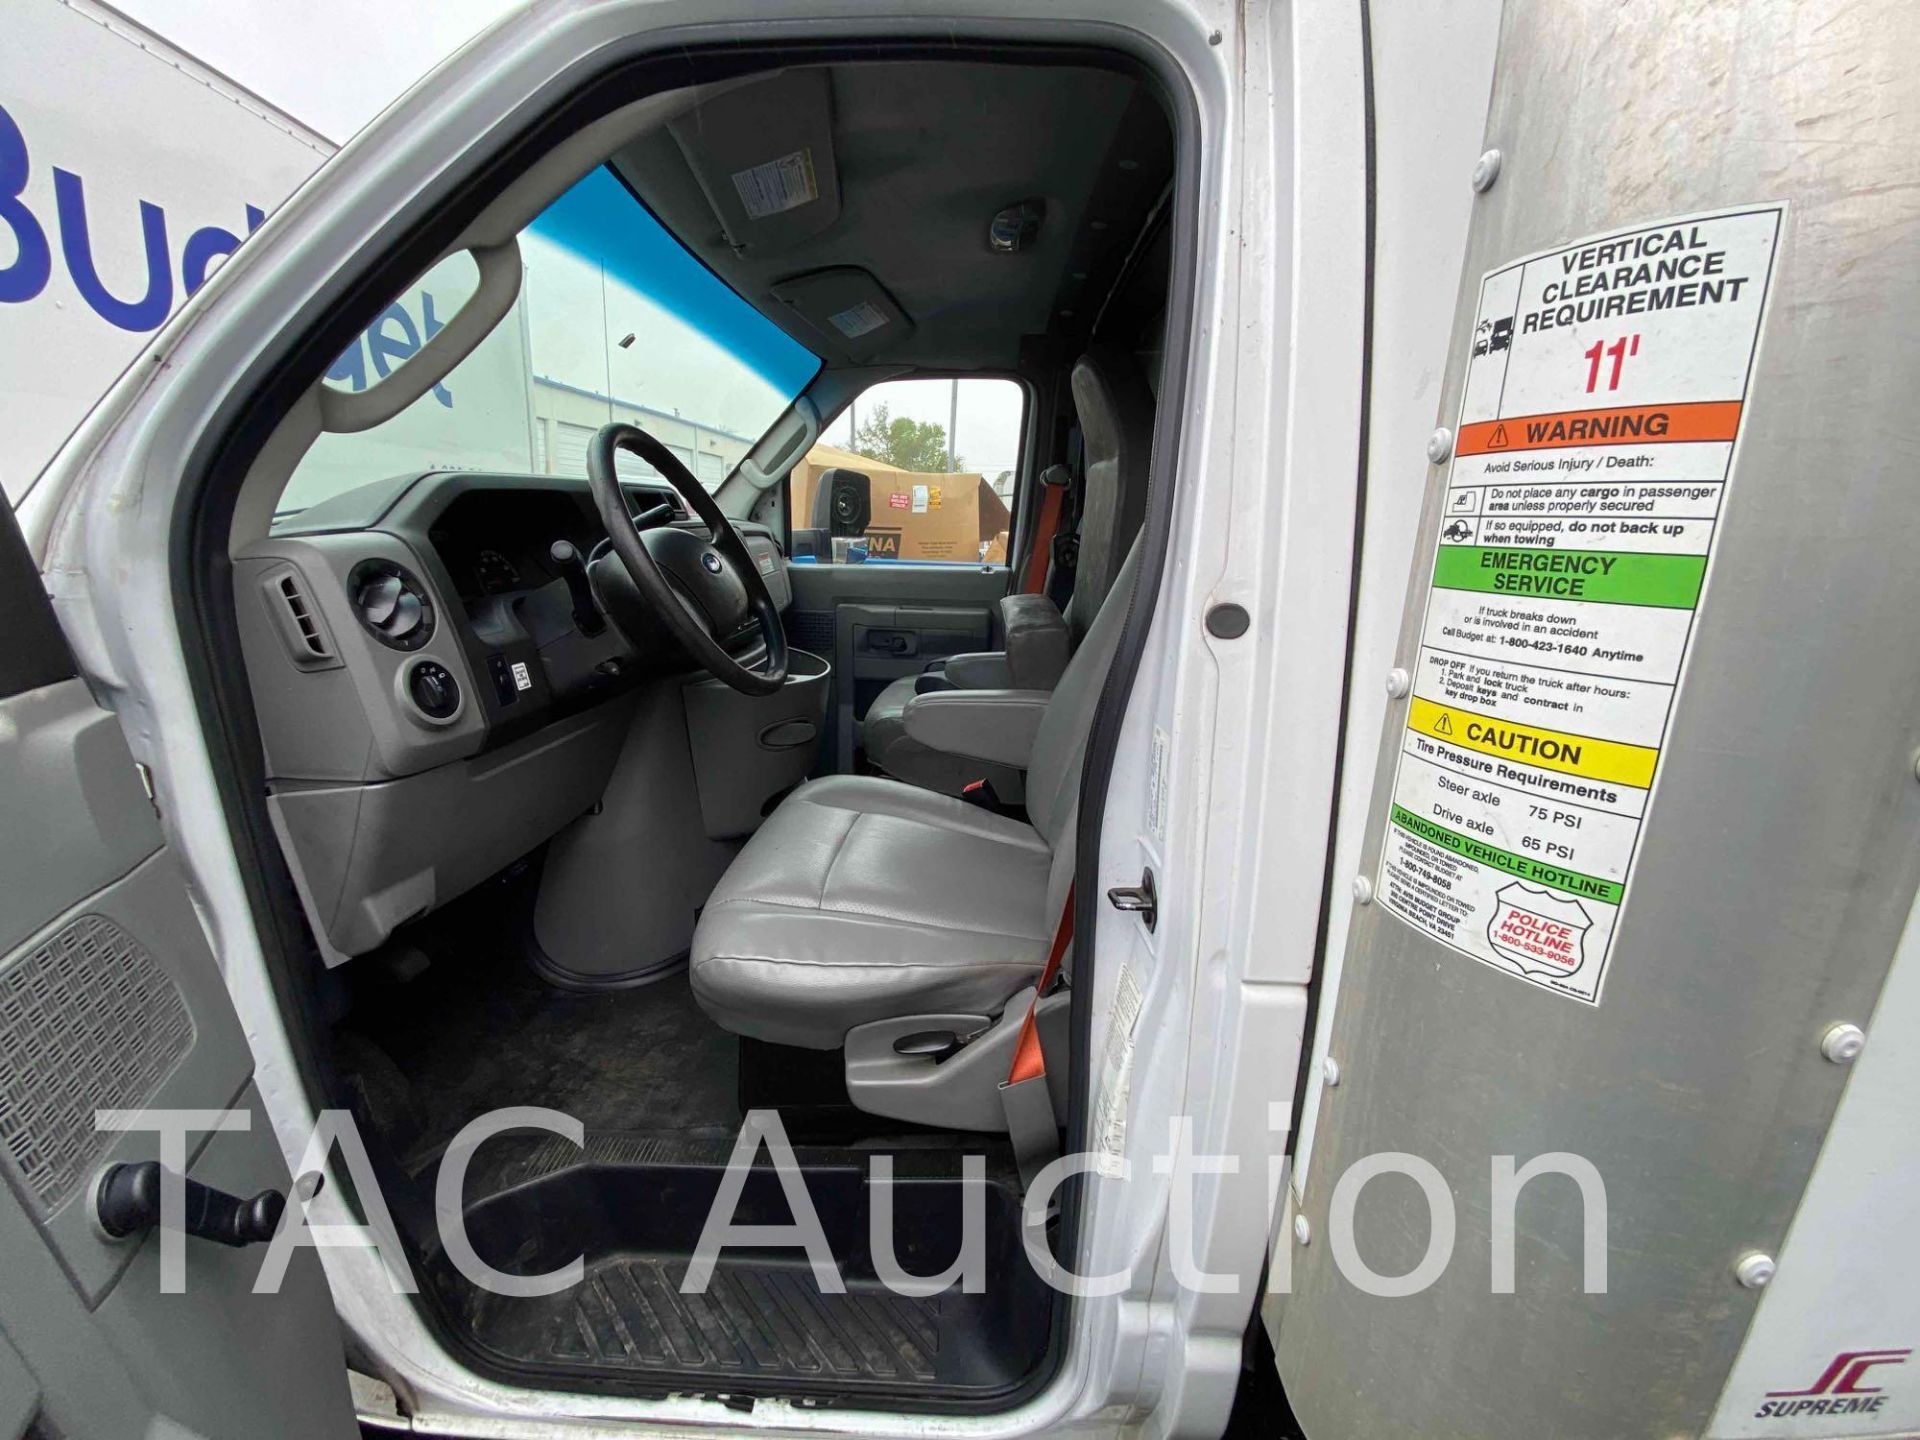 2016 Ford E-350 16ft Box Truck - Image 13 of 49